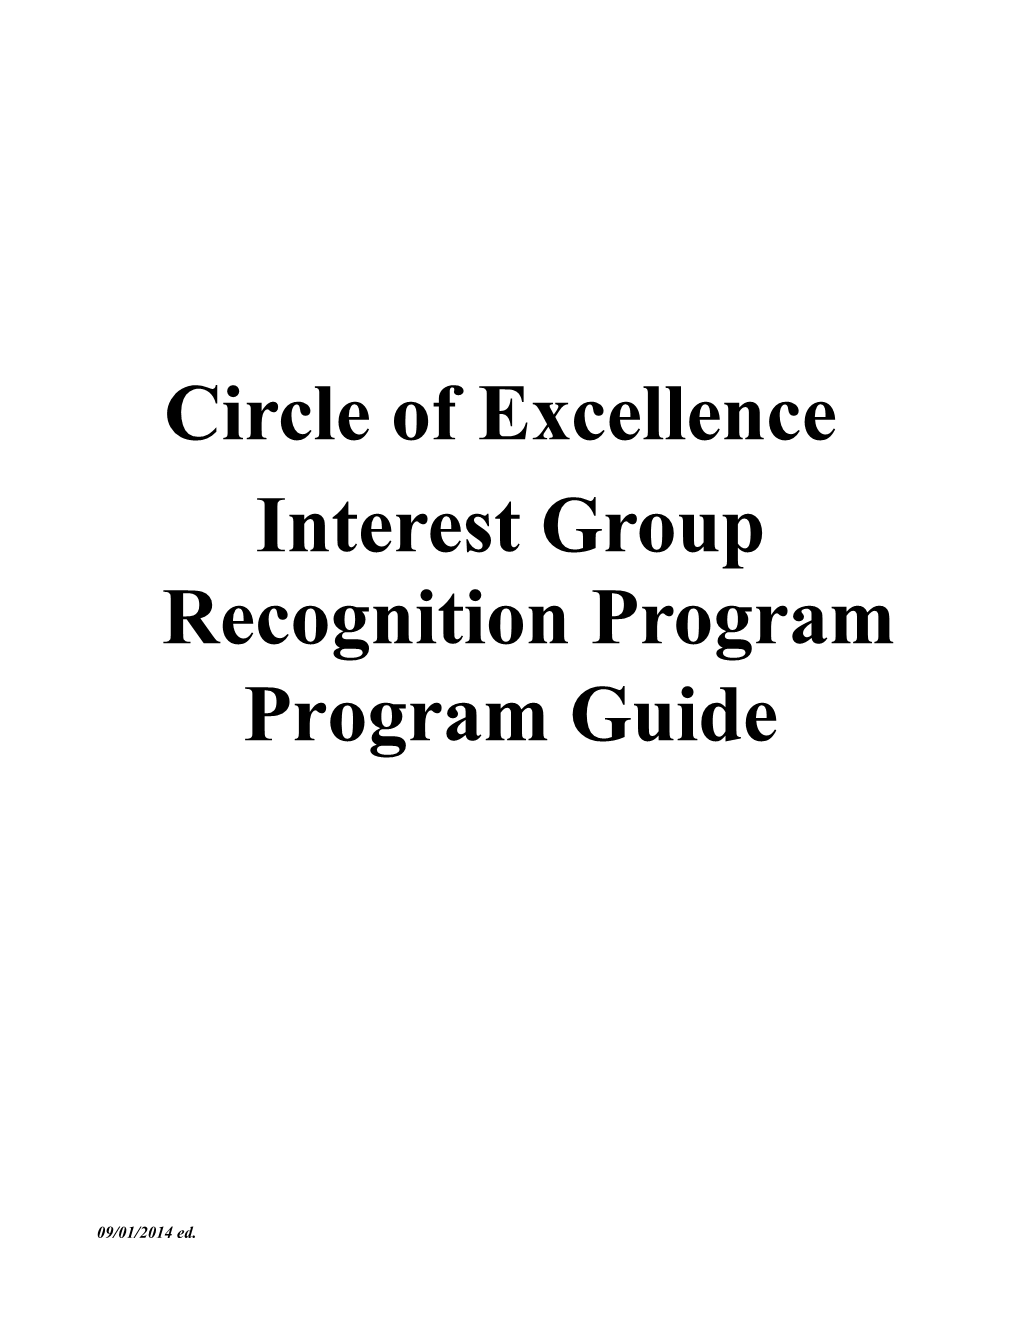 Interest Groups Circle of Excellence Recognition Program